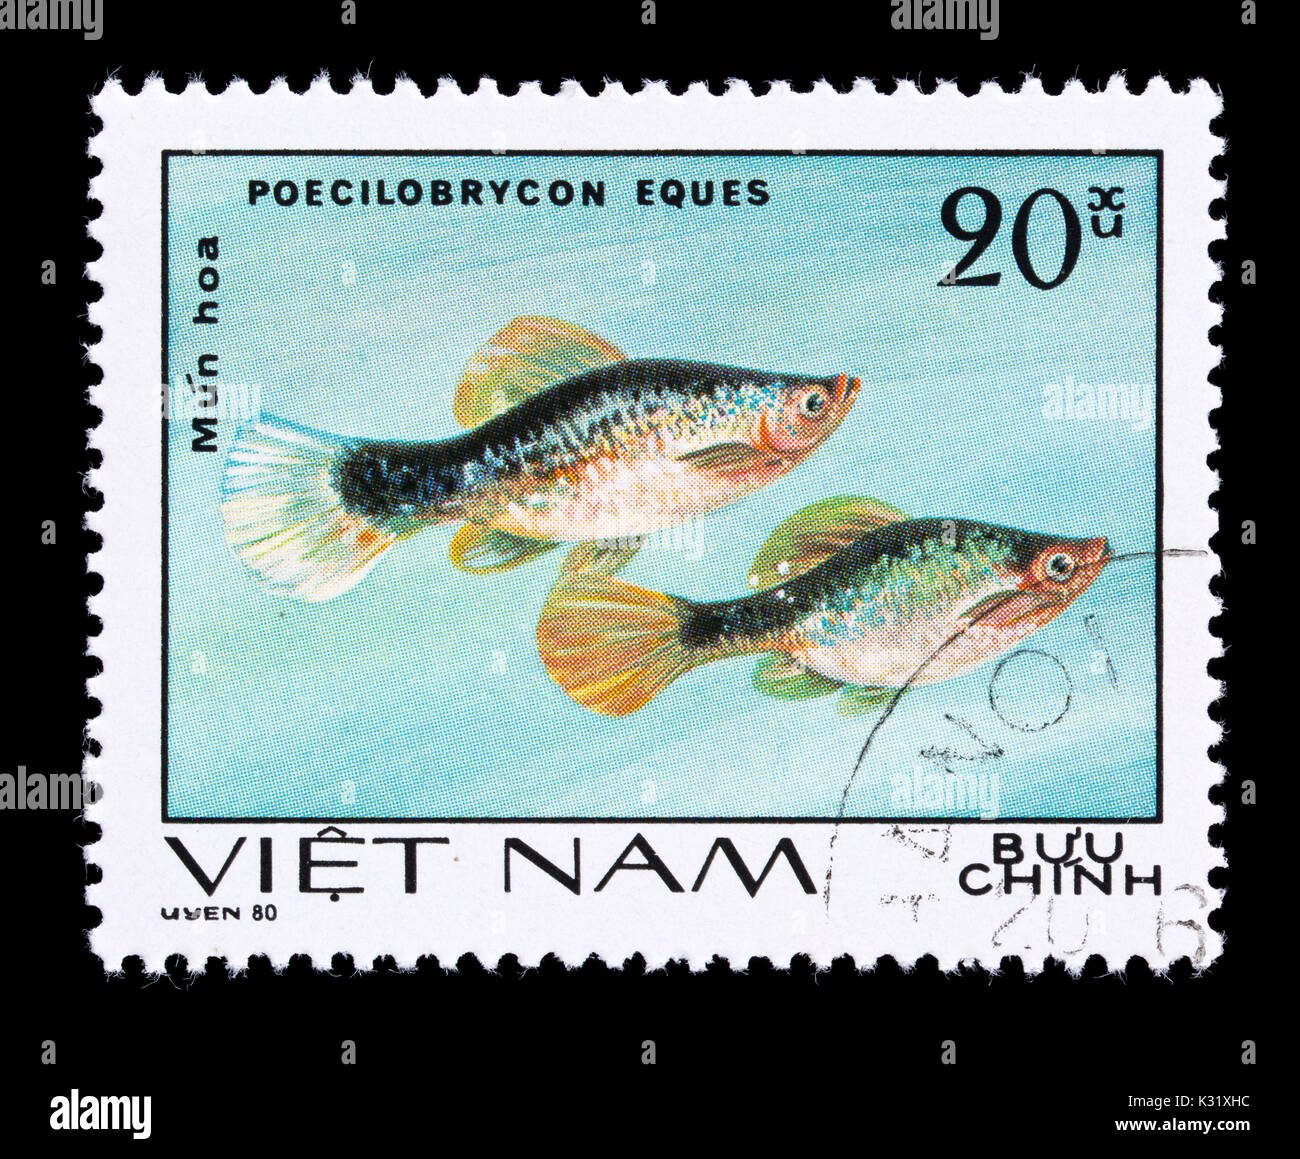 Postage stamp from Vietnam depicting a Diptail pencilfish Poecilobrycon eques Stock Photo